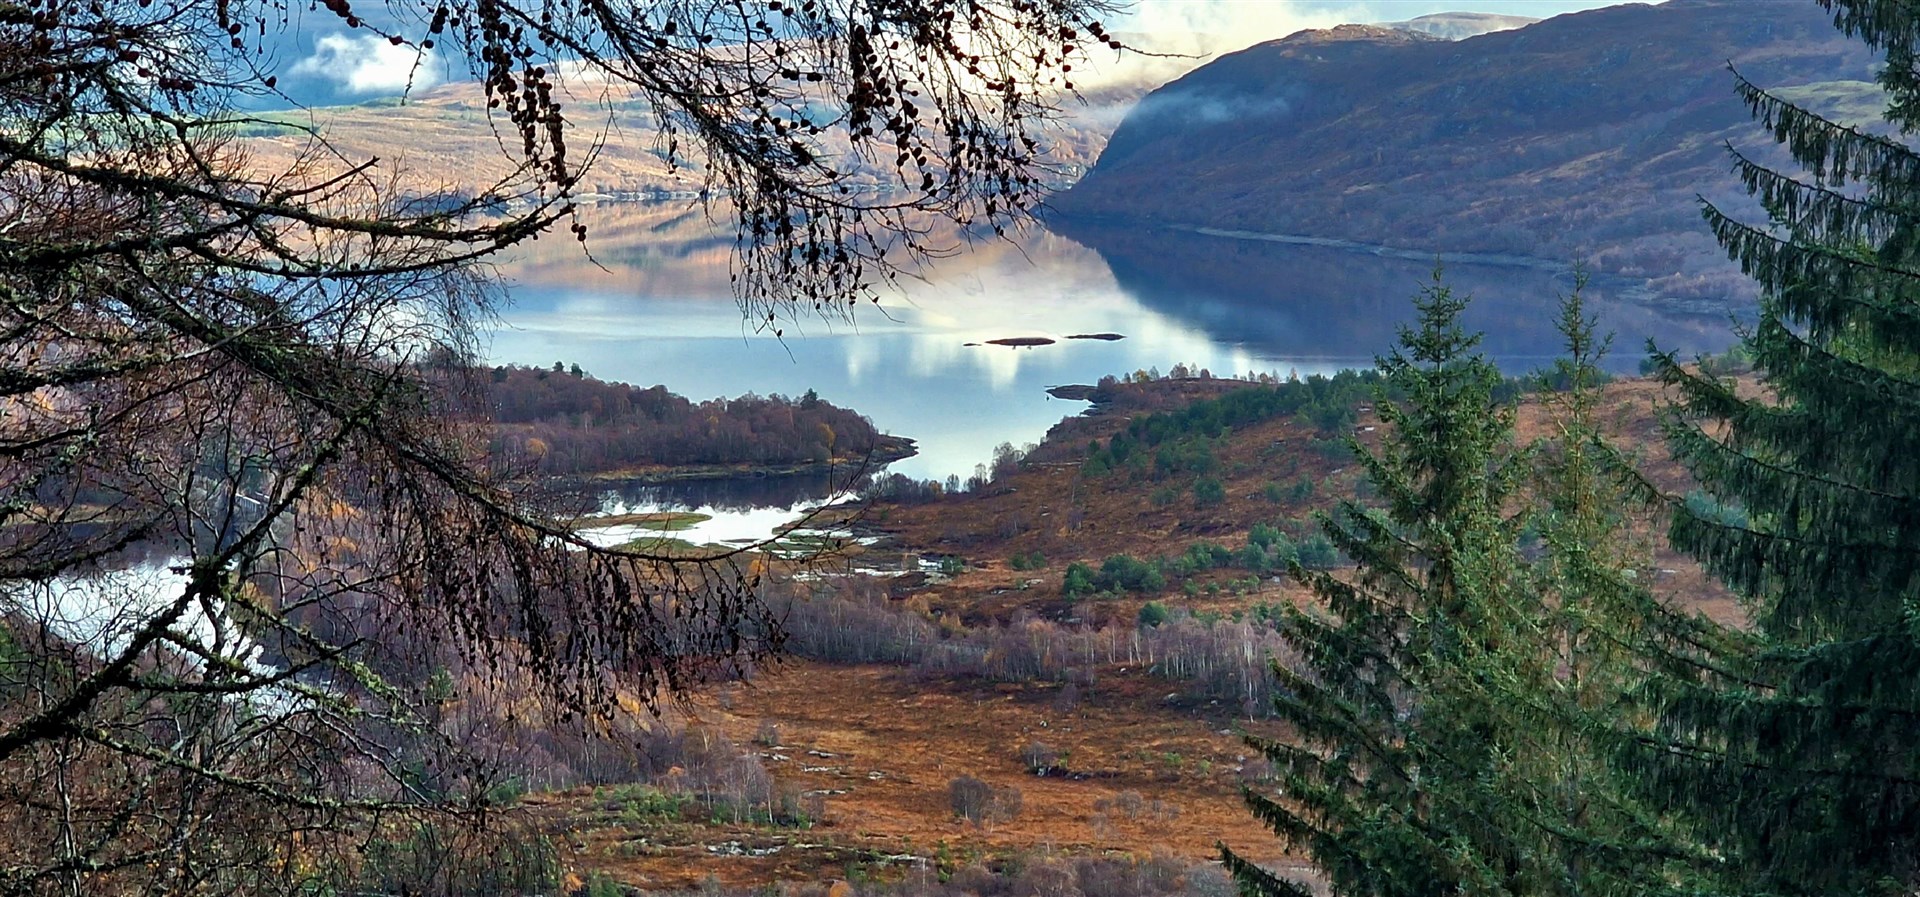 James McPake took this stunning image at Lochluichart for our Ross-shire through the Lens feature.